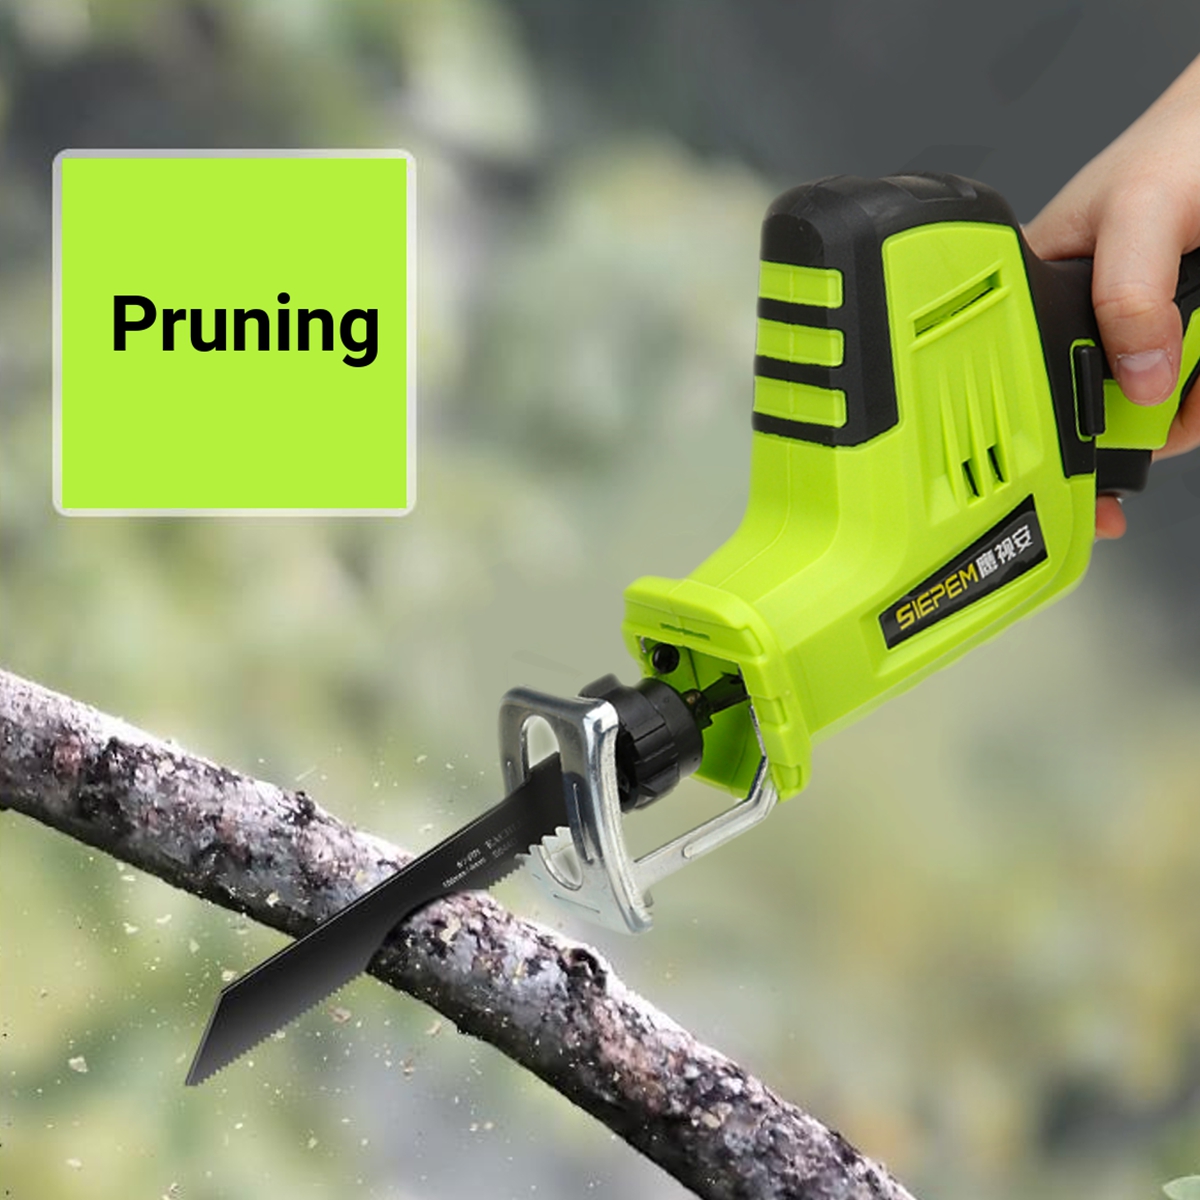 12V-Cordless-Electric-Reciprocating-Saw-Portable-Garden-Cutting-Tool-Saws-with-1-or-2-Battery-1772582-3